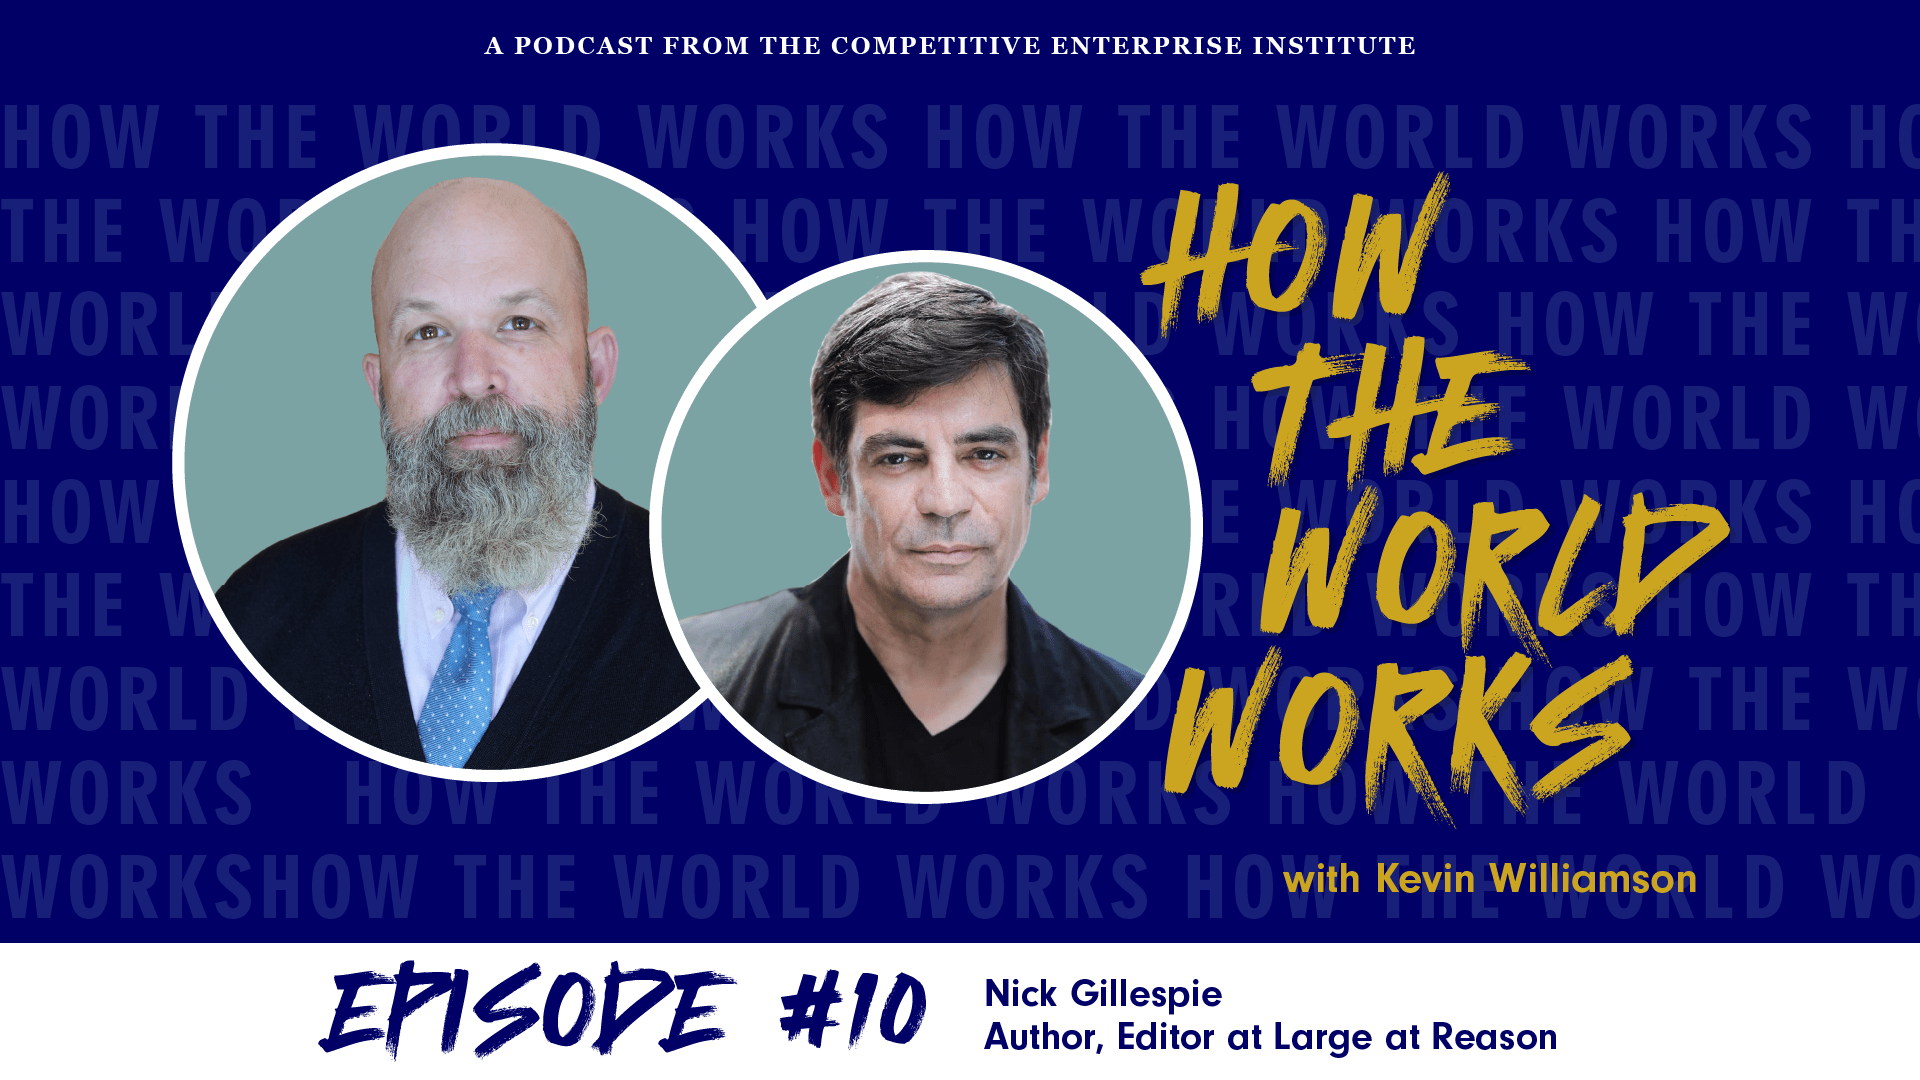 How the World Works Podcast with Nick Gillespie